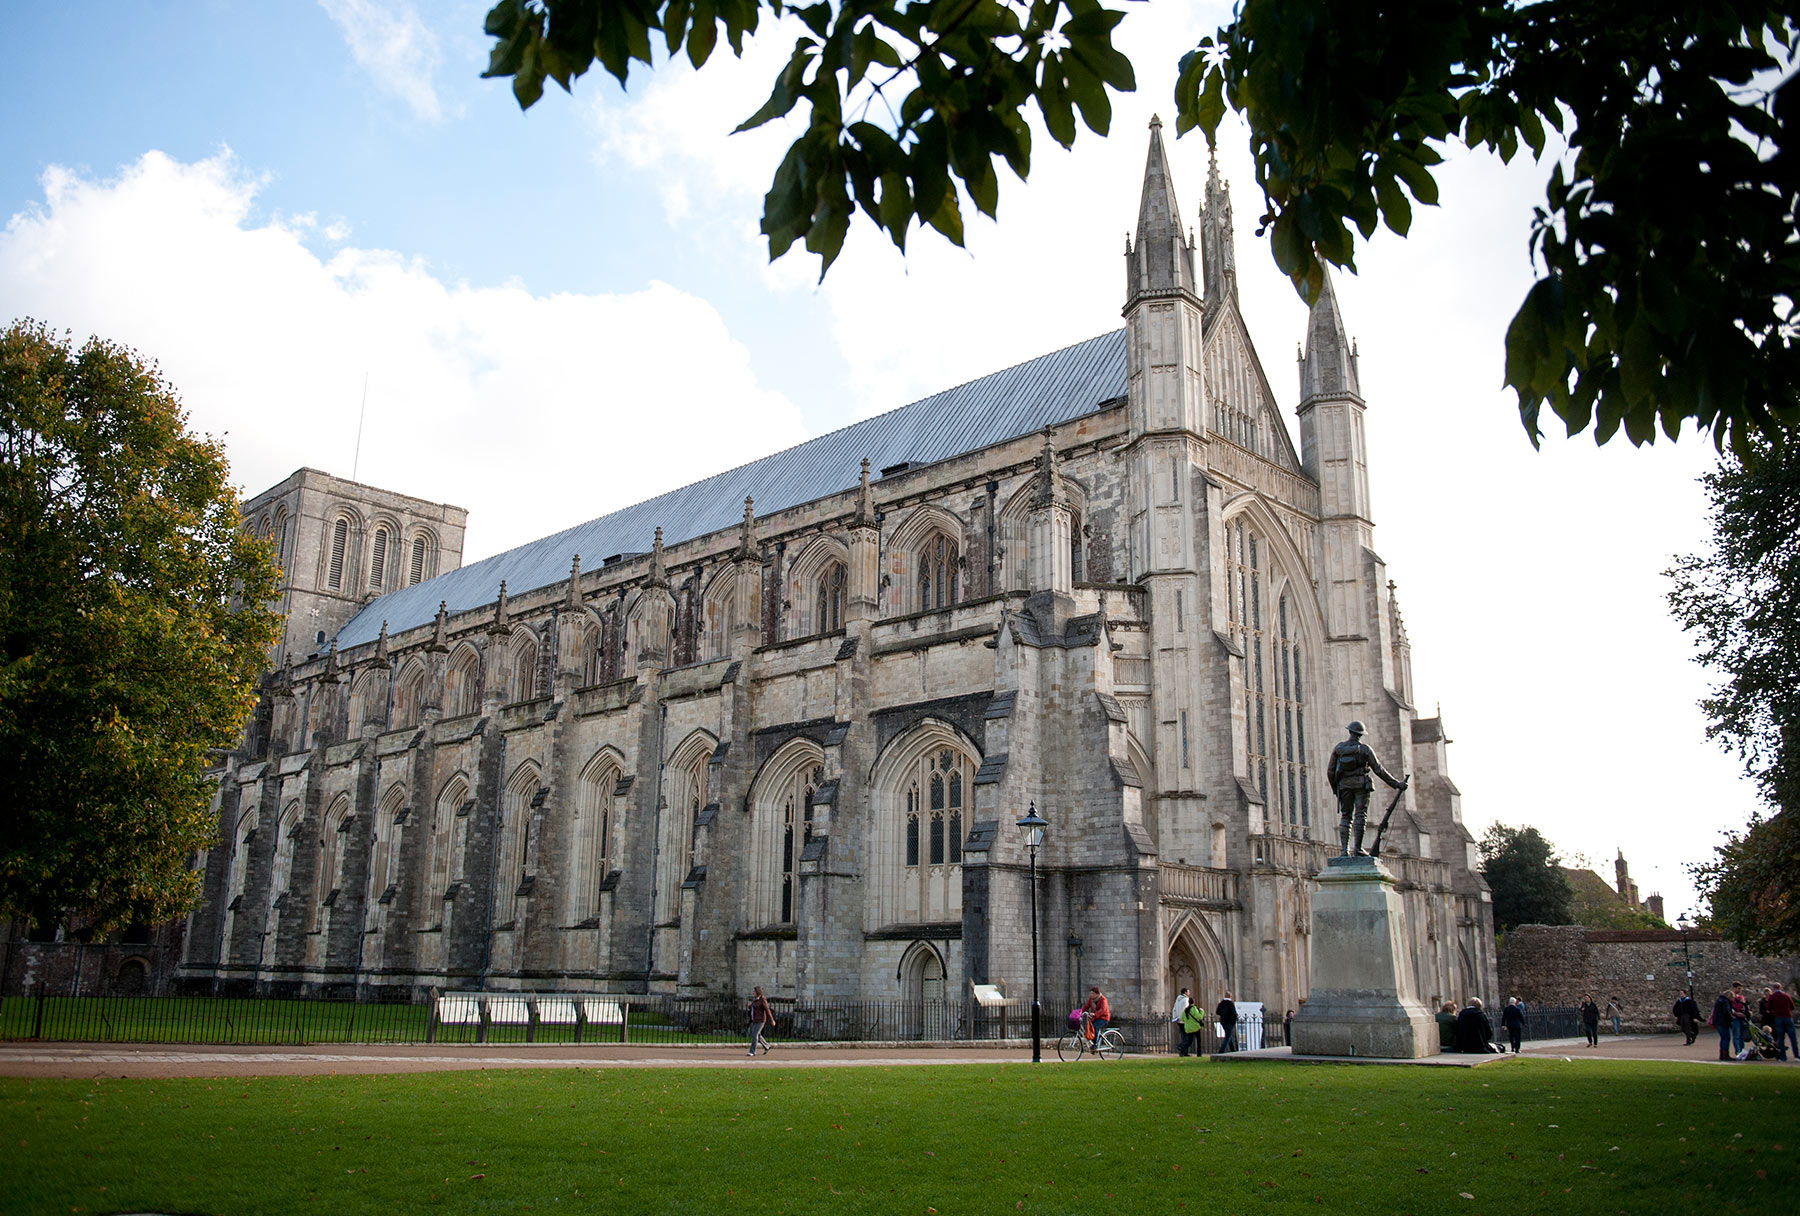 https://www.winchester.ac.uk/media/Content-Assets/About-Us/Winchester-Cathedral.jpg